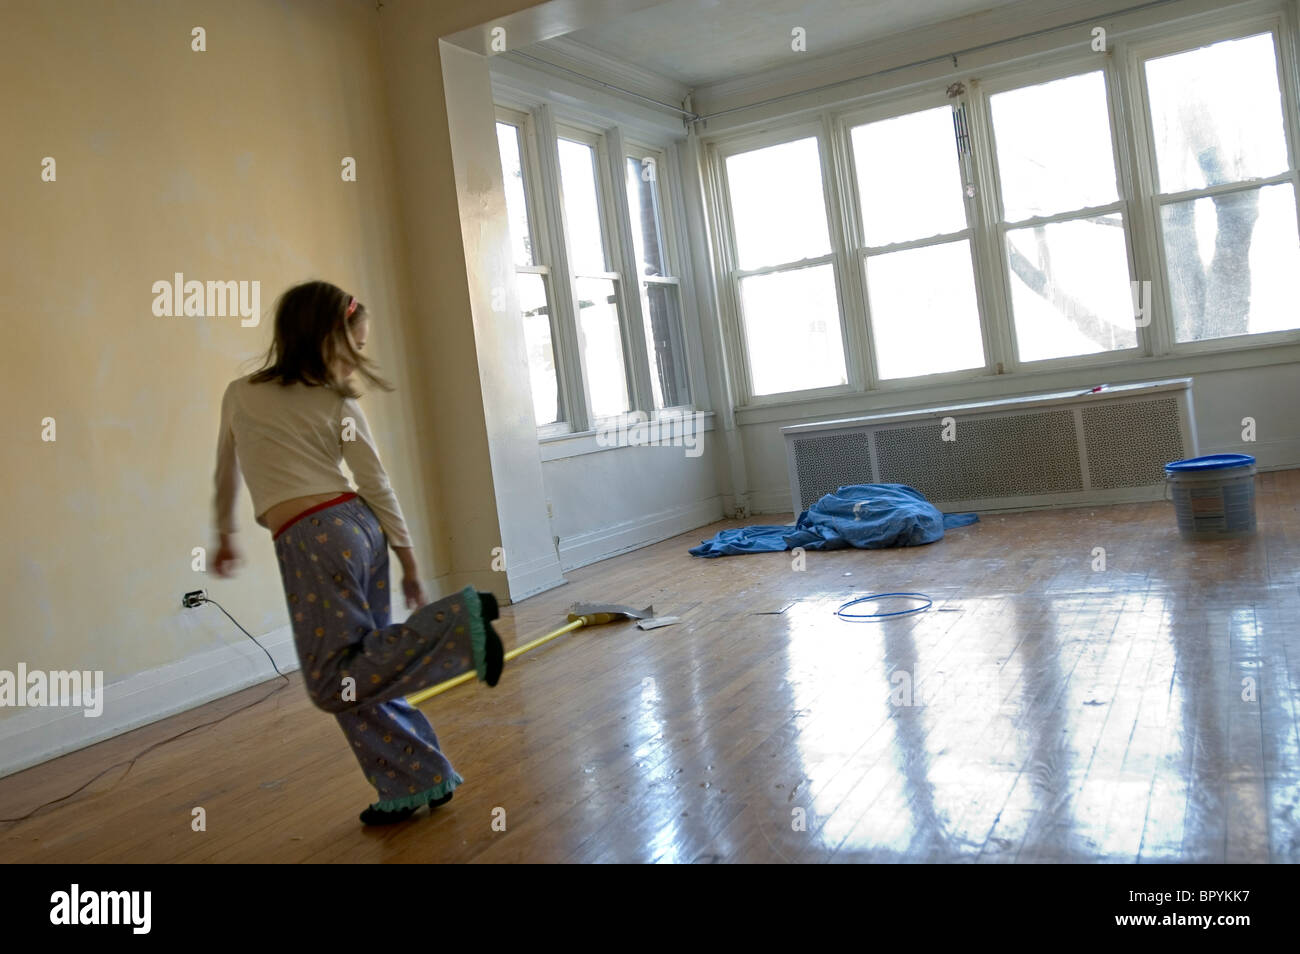 A young girl plays in an empty apartment undergoing renovations. Stock Photo